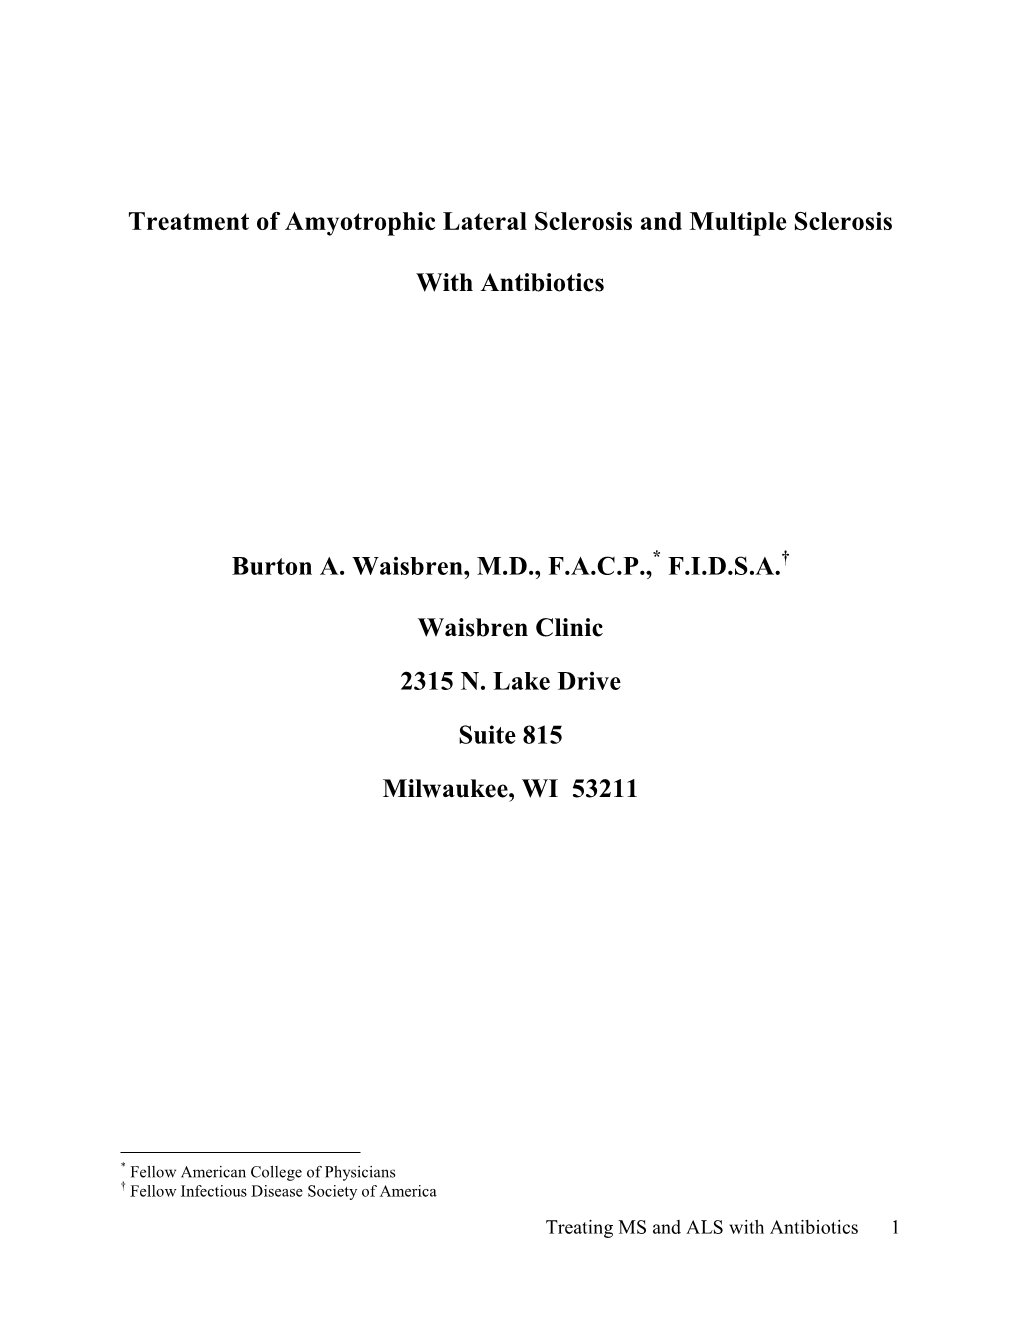 Treatment of Amyotrophic Lateral Sclerosis and Multiple Sclerosis